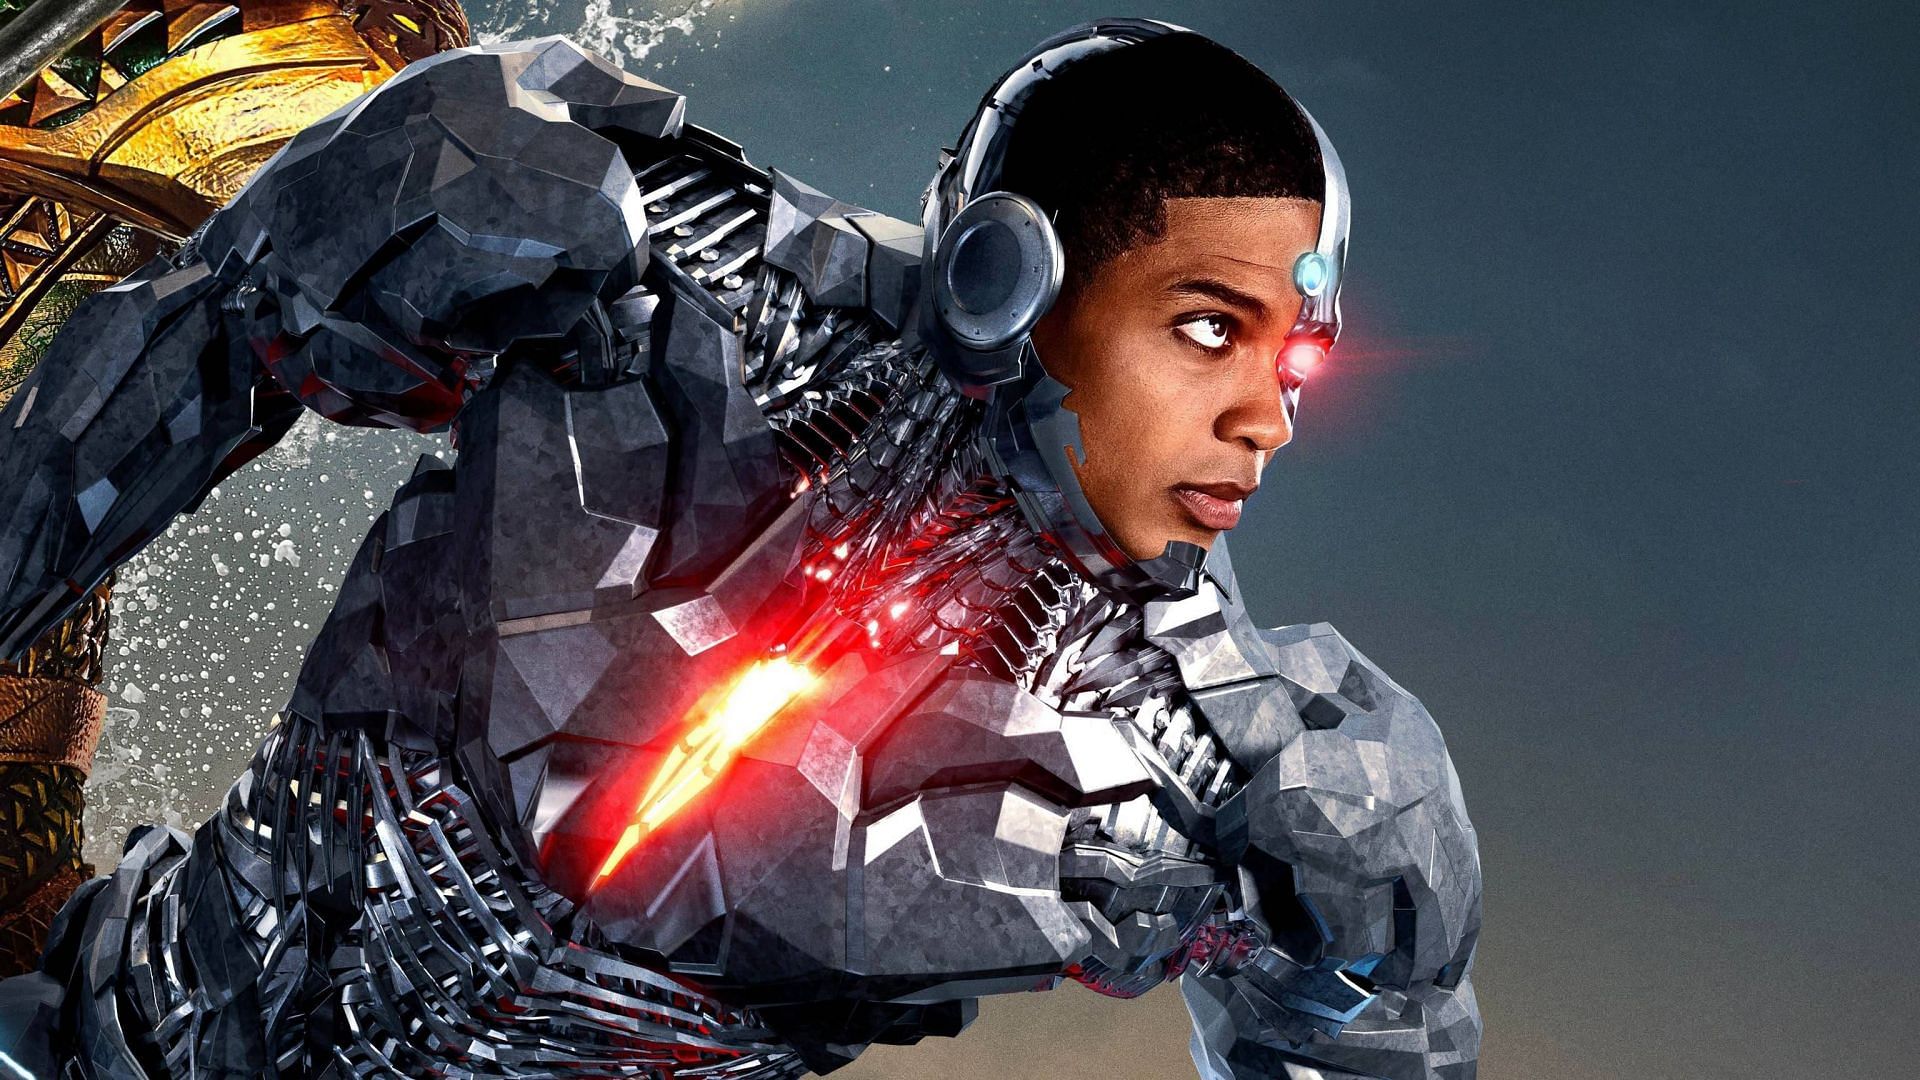  Cyborg deserves his own solo movie because of his compelling character. (Image via DC)